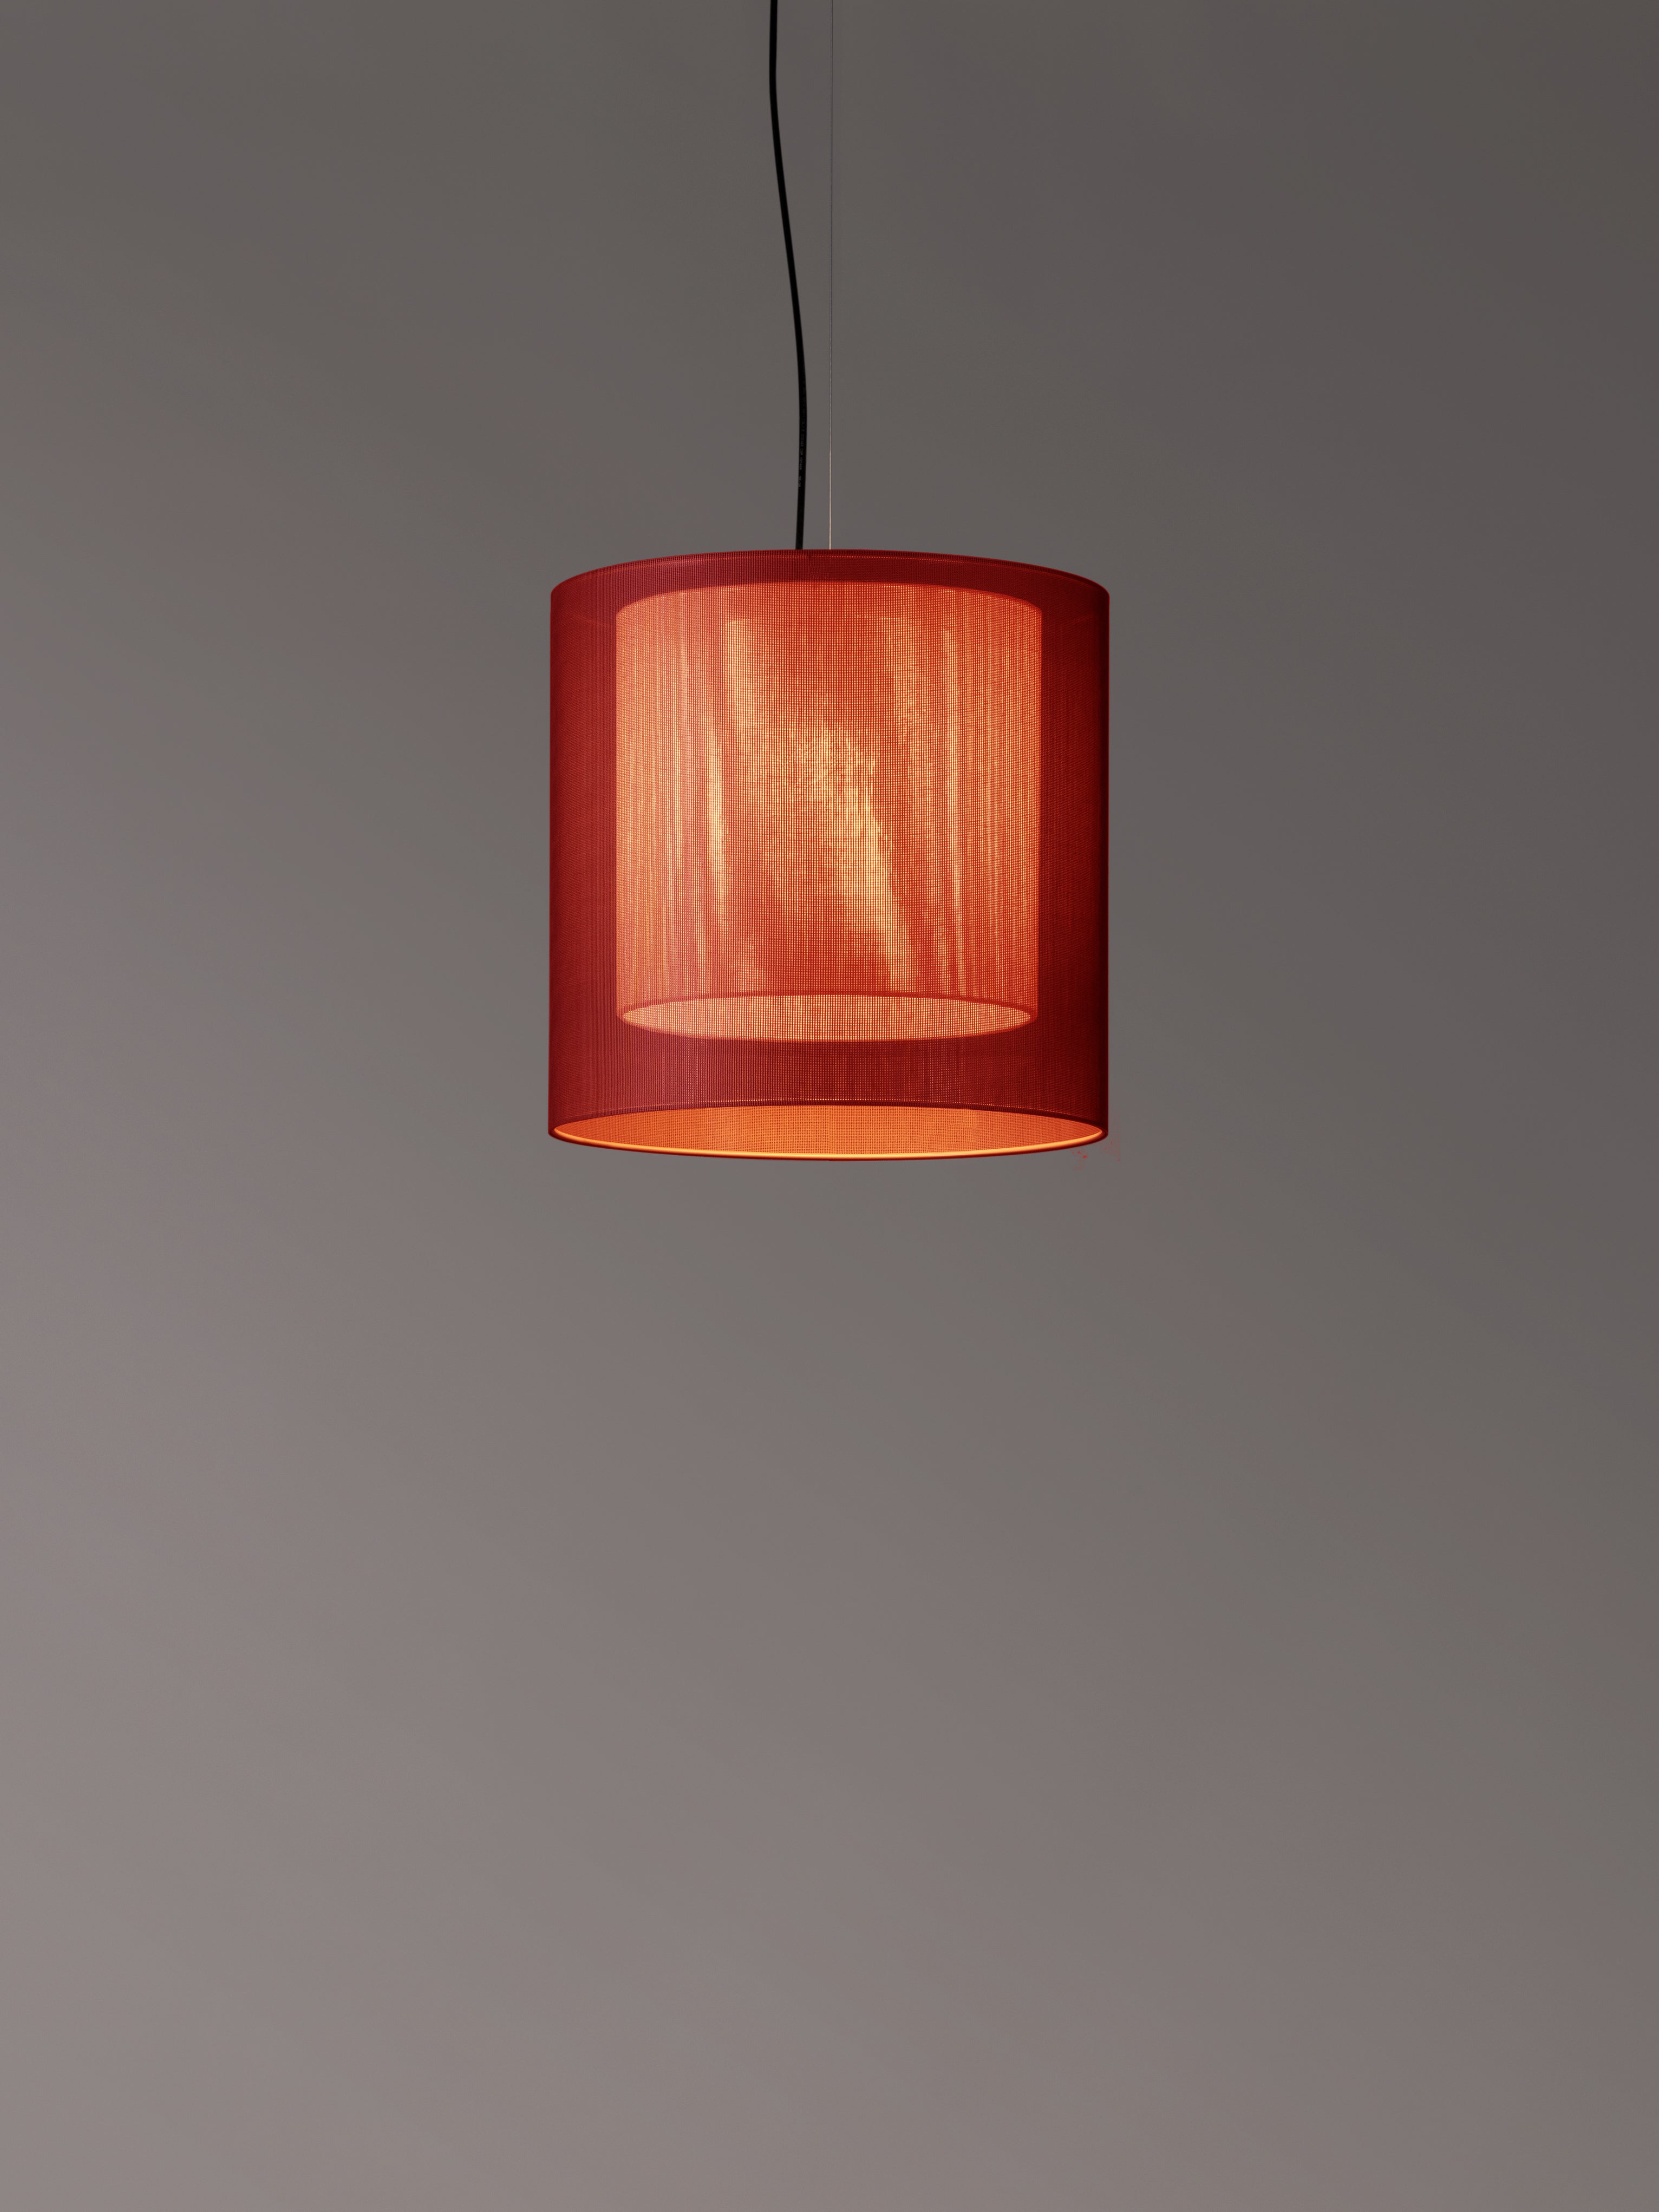 Red and white Moaré MS pendant lamp by Antoni Arola
Dimensions: D 46 x H 45 cm
Materials: Metal, polyester.
Available in other colors and sizes.

Moaré’s multiple combinations of formats and colours make it highly versatile. The series takes